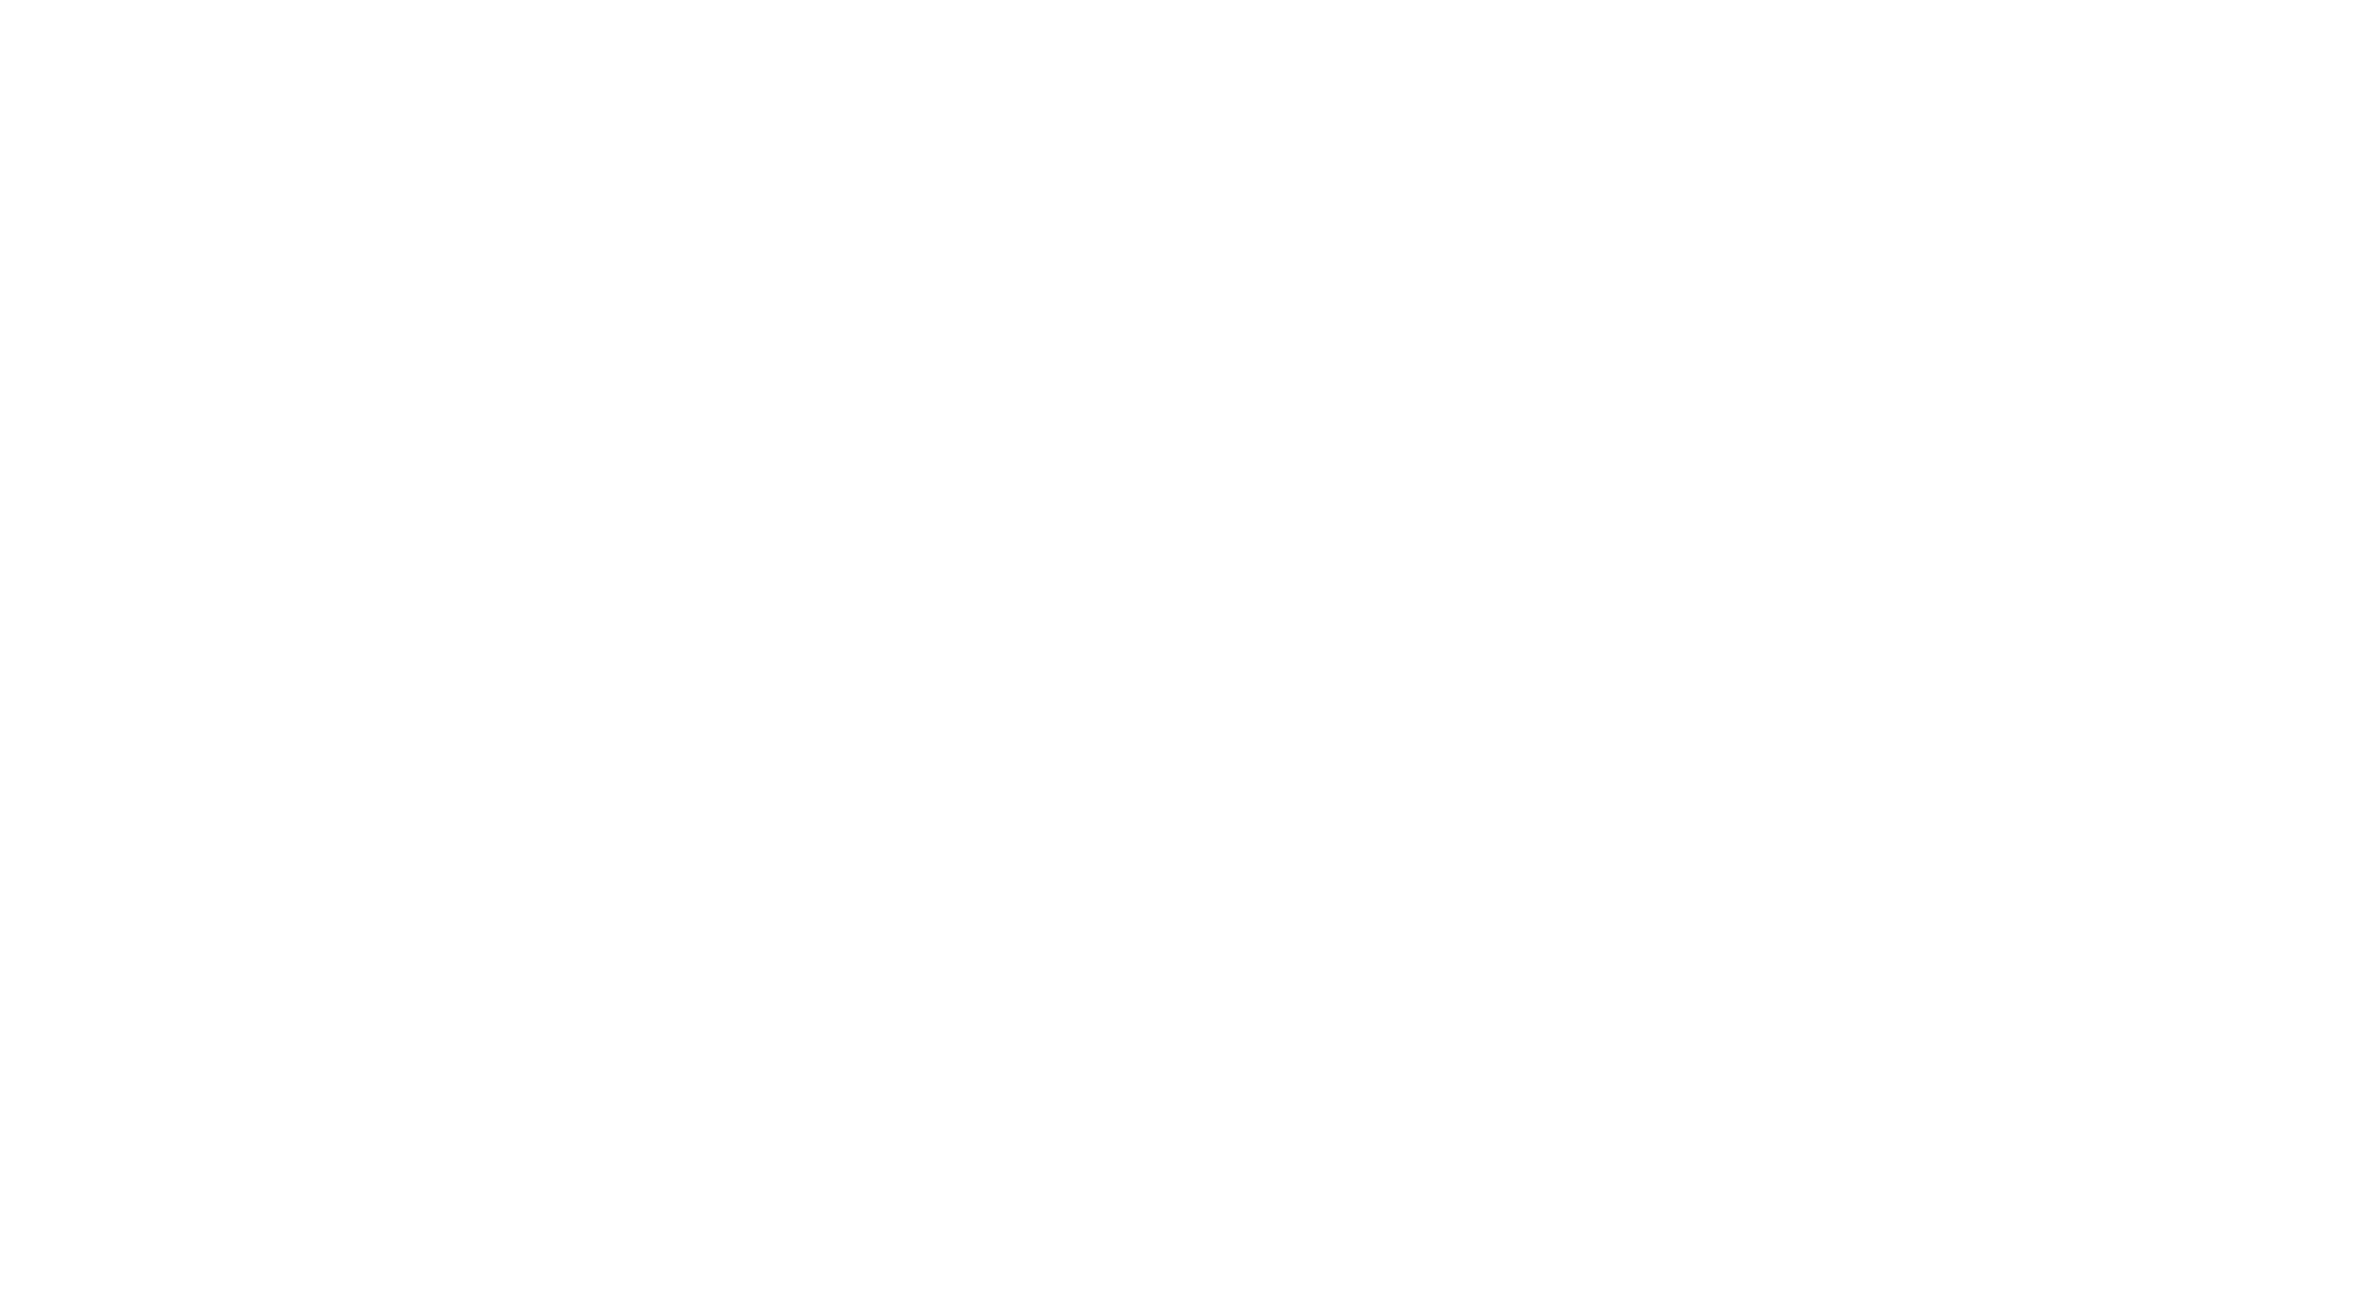 The Great Christmas Light Fight logo